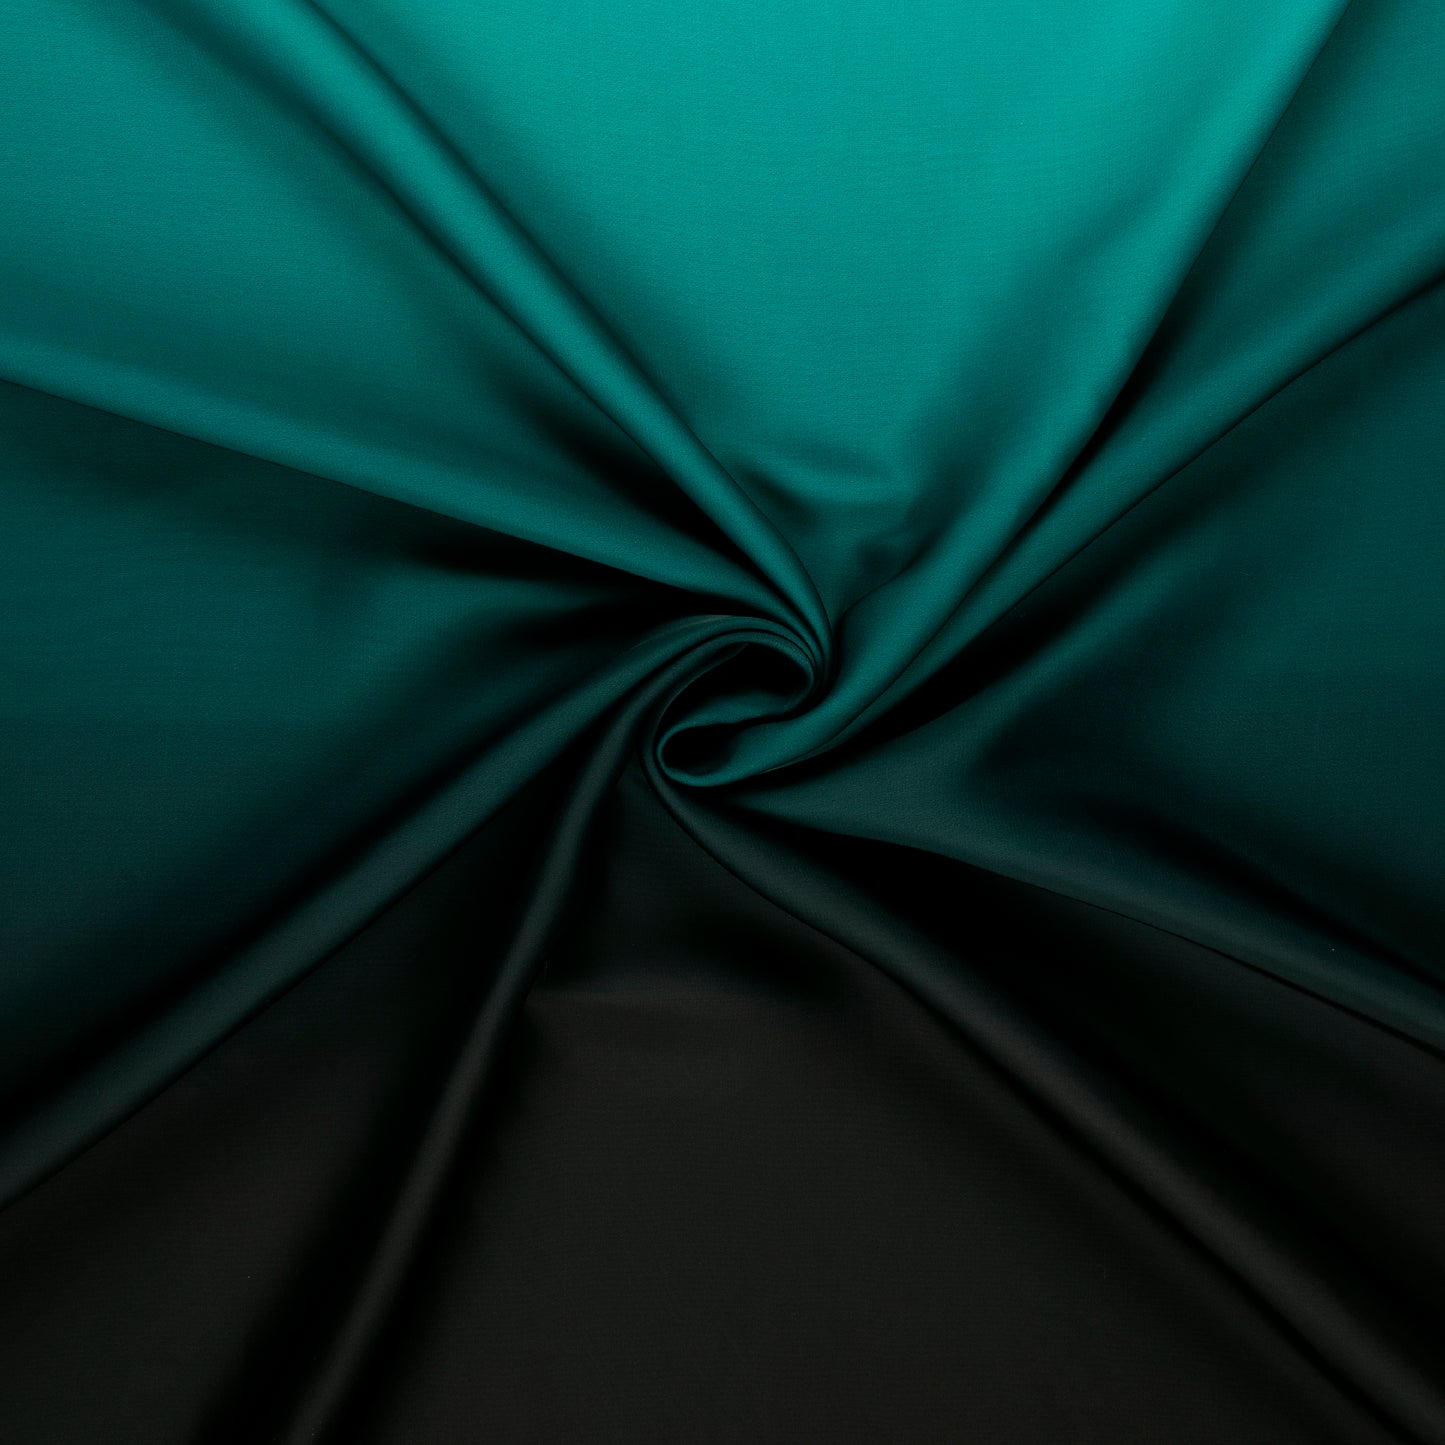 Green Ombre Digital Print Imported Satin Fabric